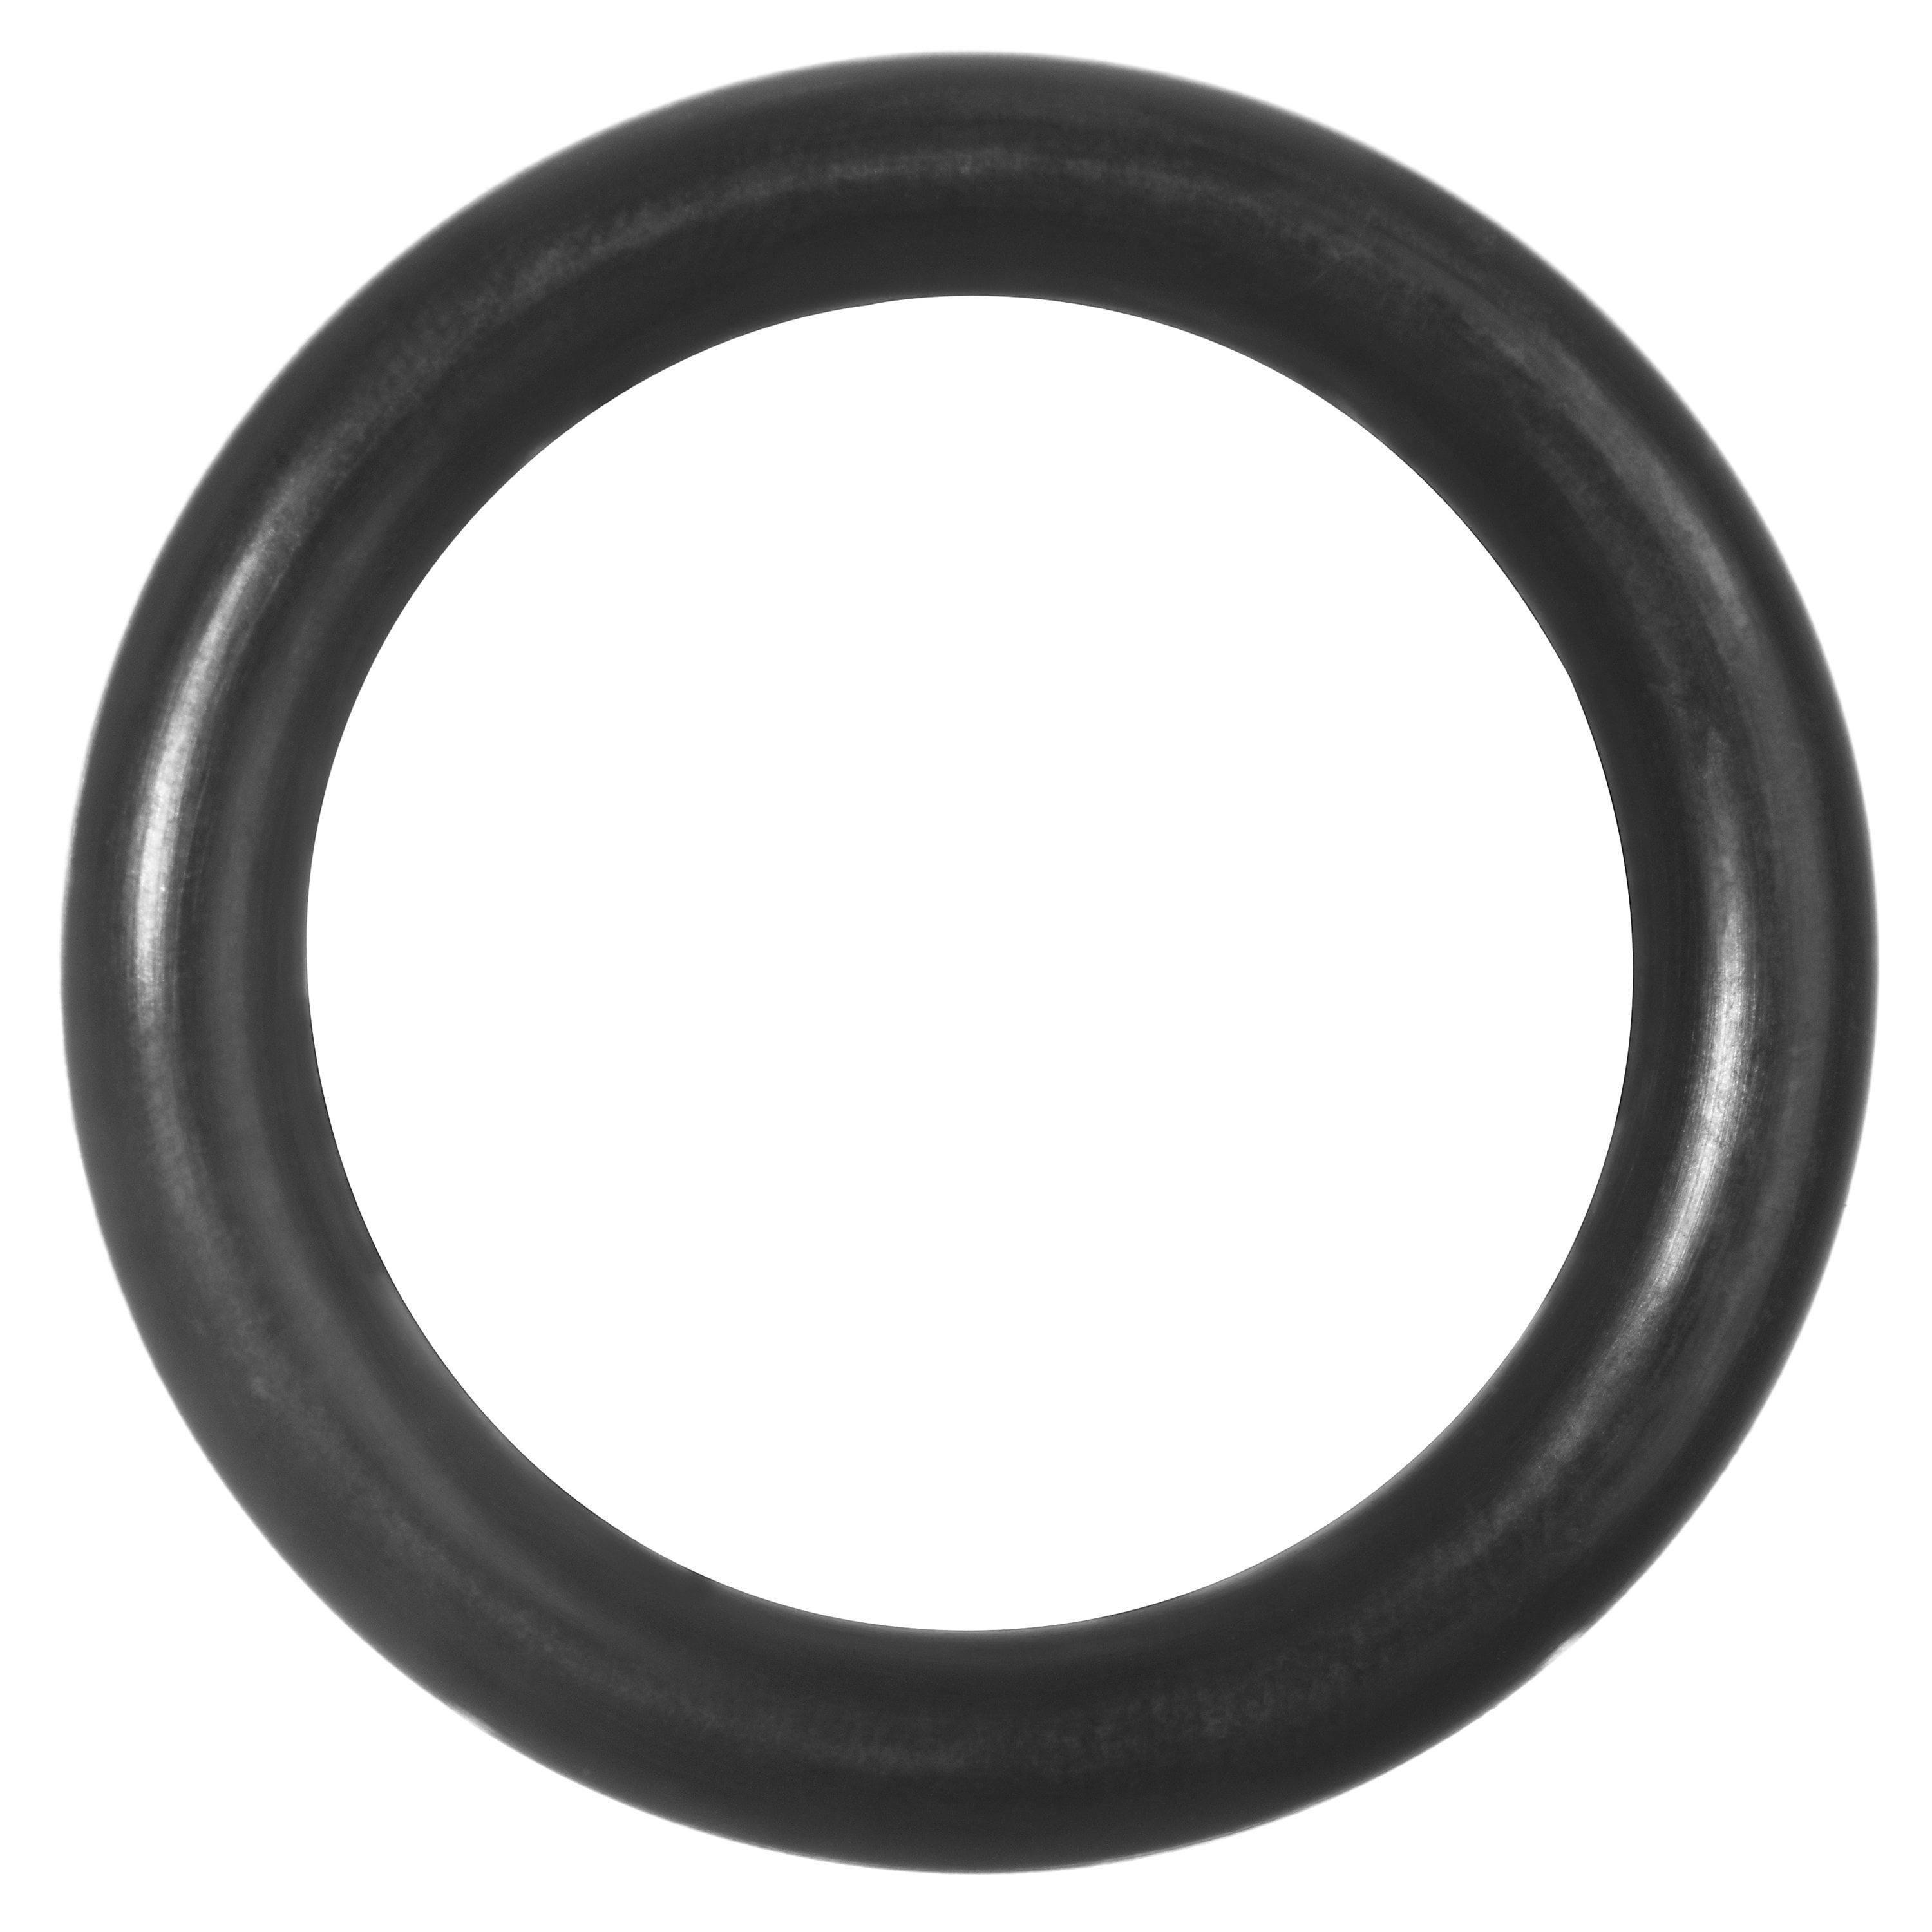 GS-3750-18 - Waterite Filter O-Ring - 3.75 Inch - Universal Filtration